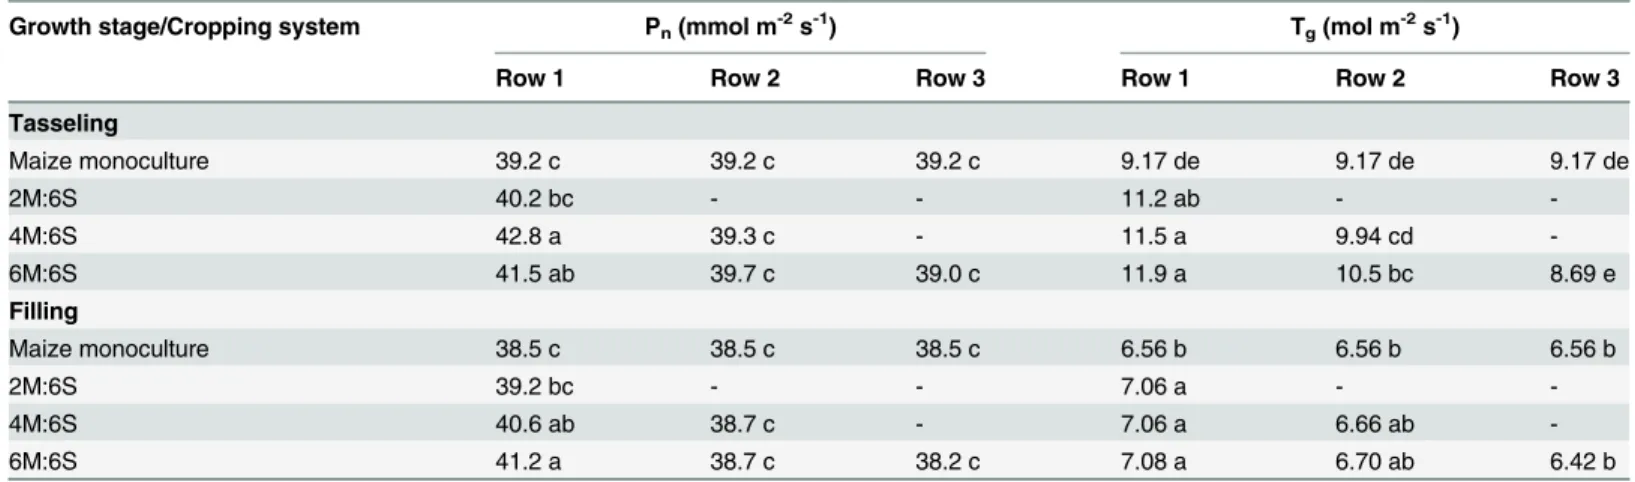 Table 6. Net photosynthetic rate (P n ) and transpiration rate (T g ) of maize at tasseling and filling stages under different cropping systems.